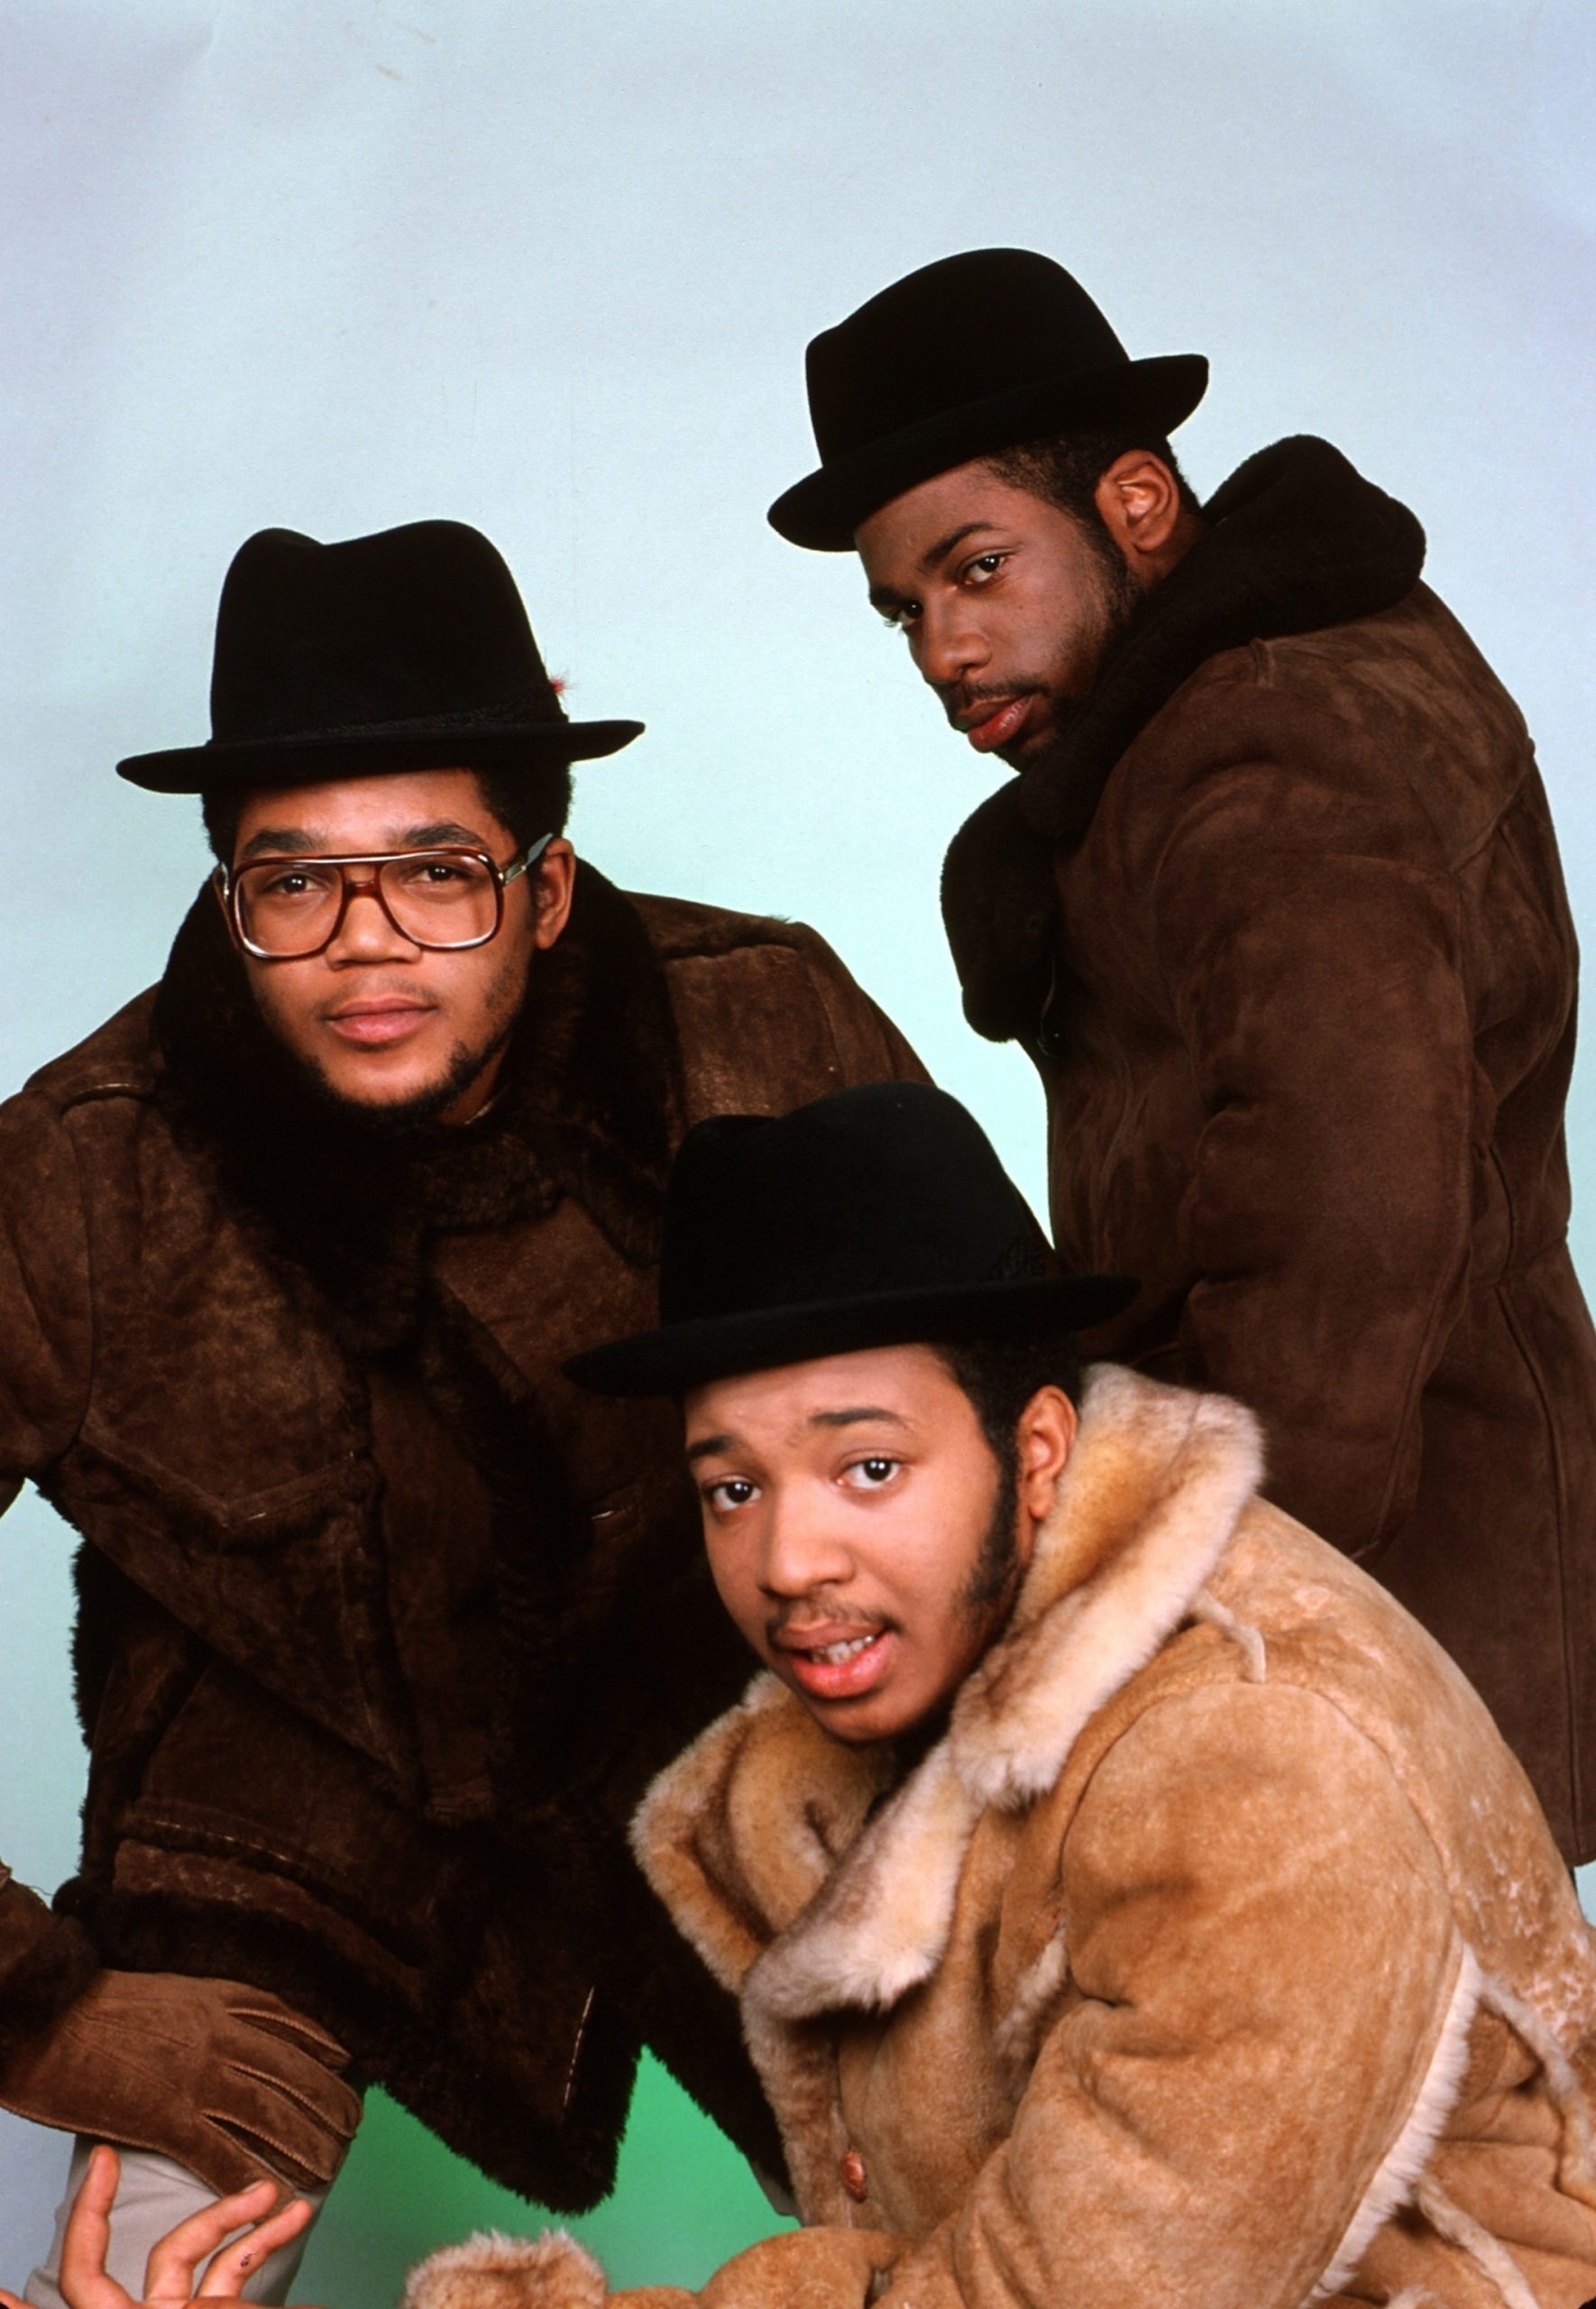 Two Men Convicted for the 2002 Murder of Run-DMC's Jam Master Jay